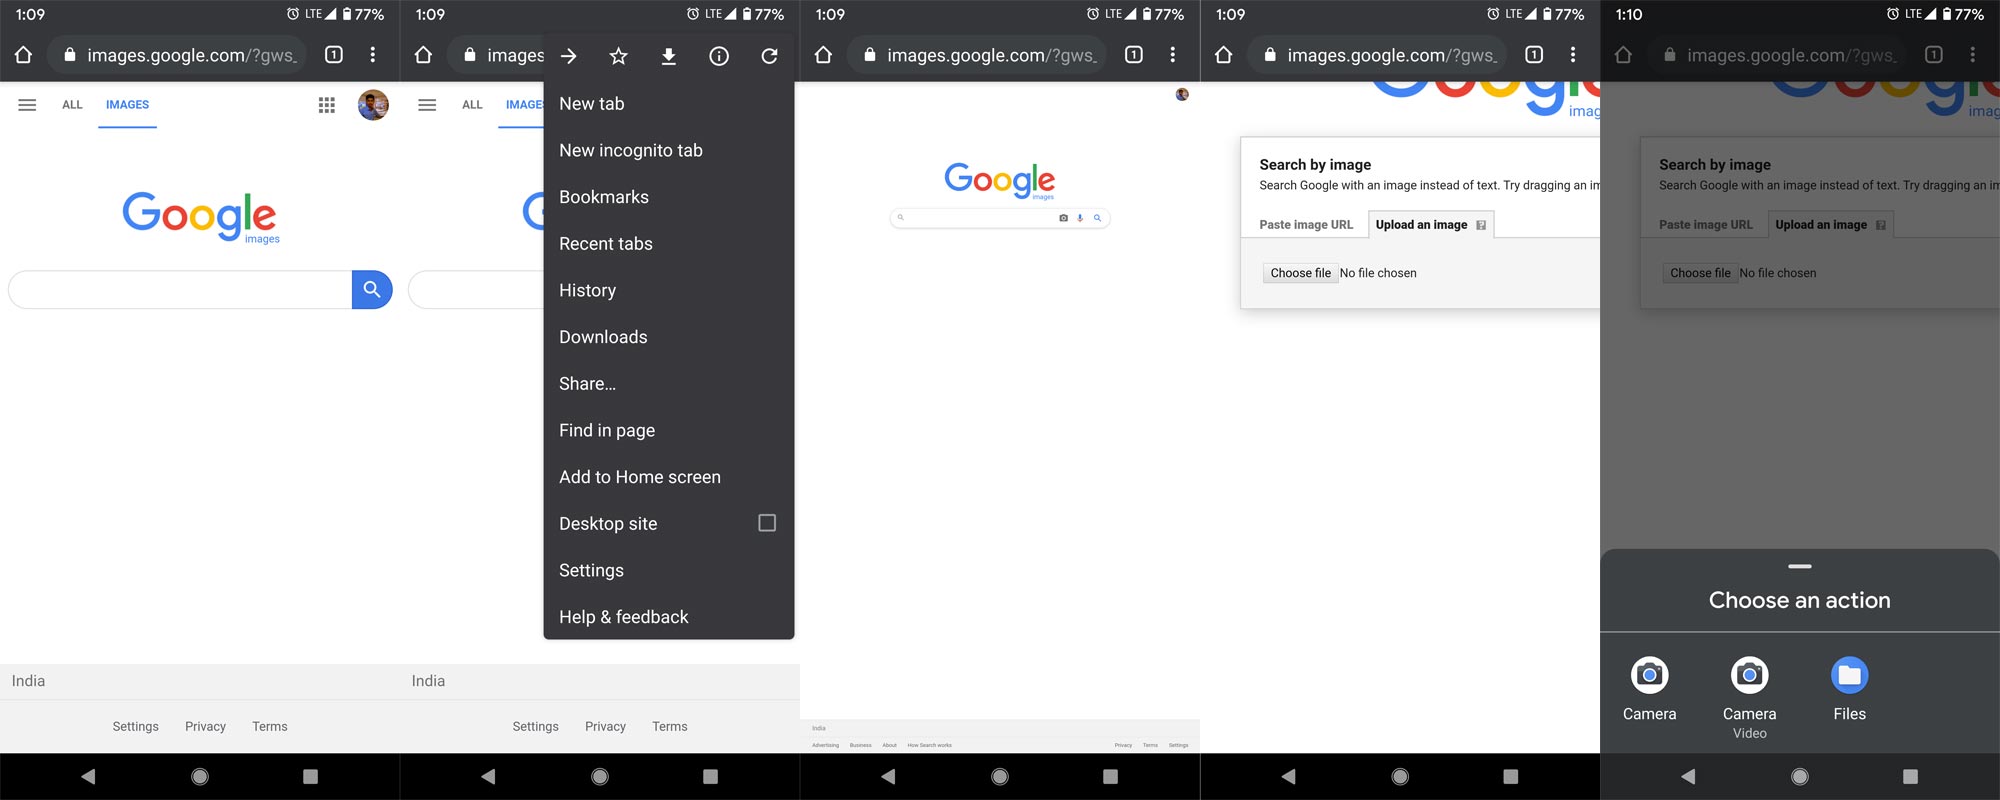 Google Image Search Desktop Version in Android